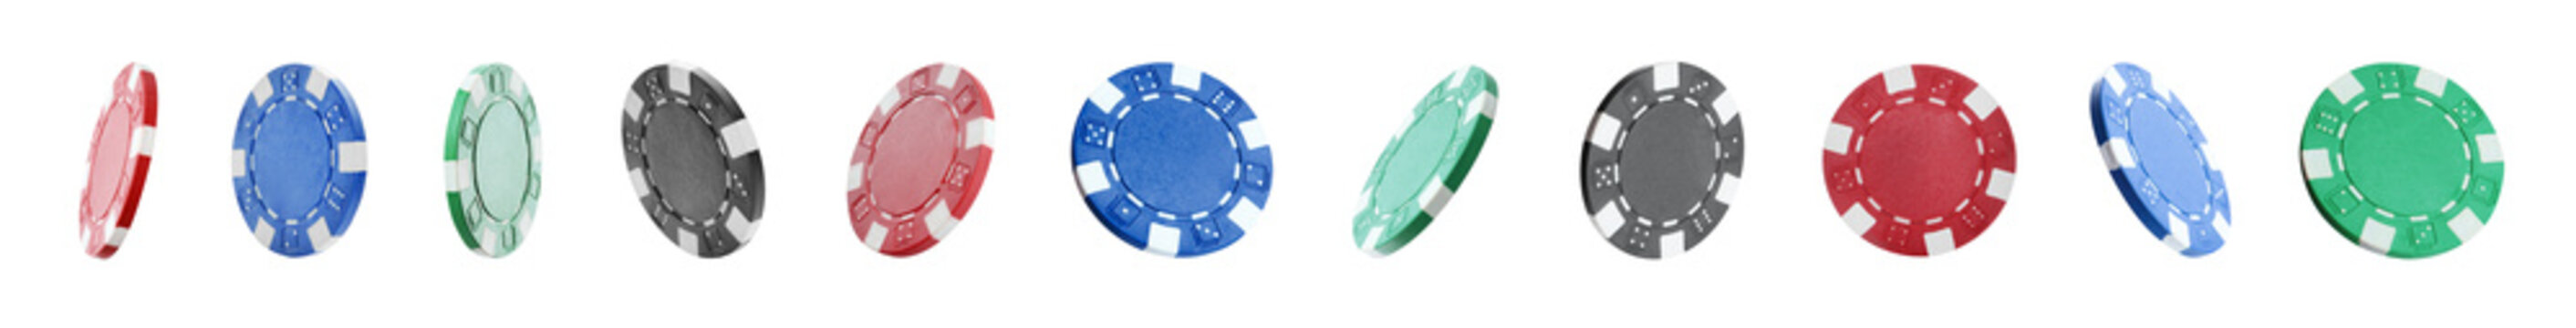 Set with different casino chips on white background. Banner design